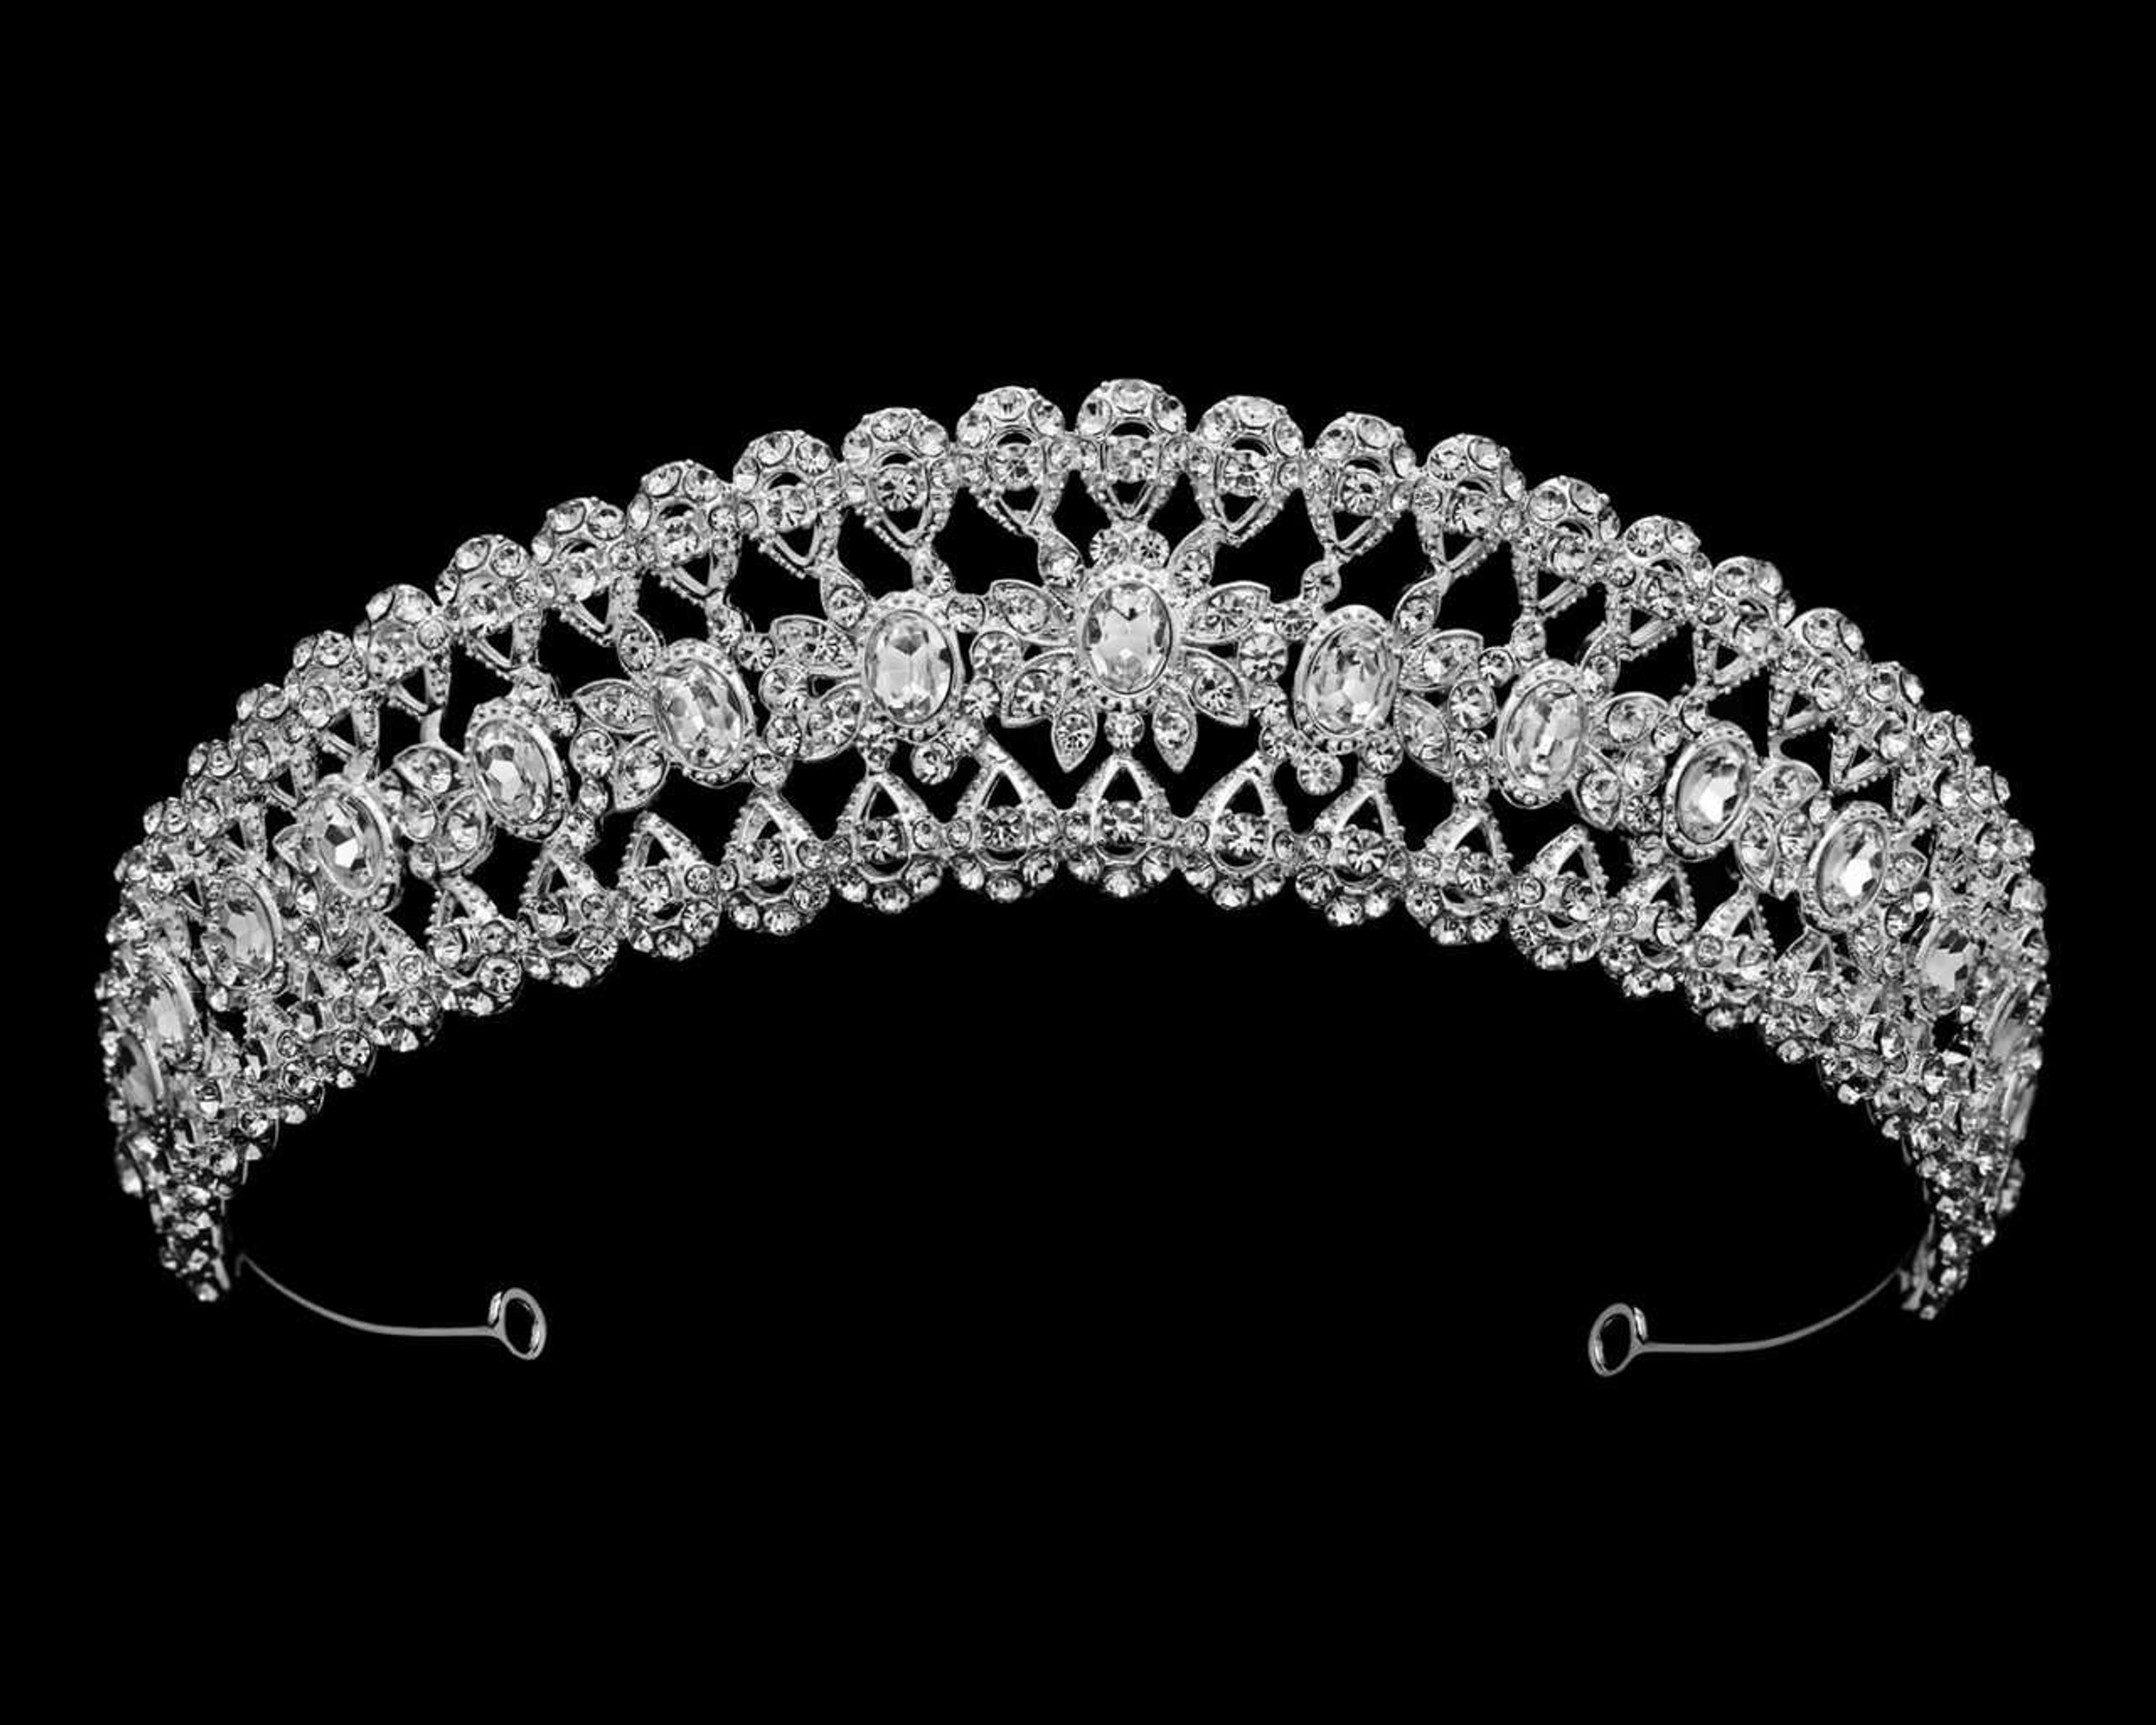 Wedding and Quinceanera Tiara with Oval Crystals